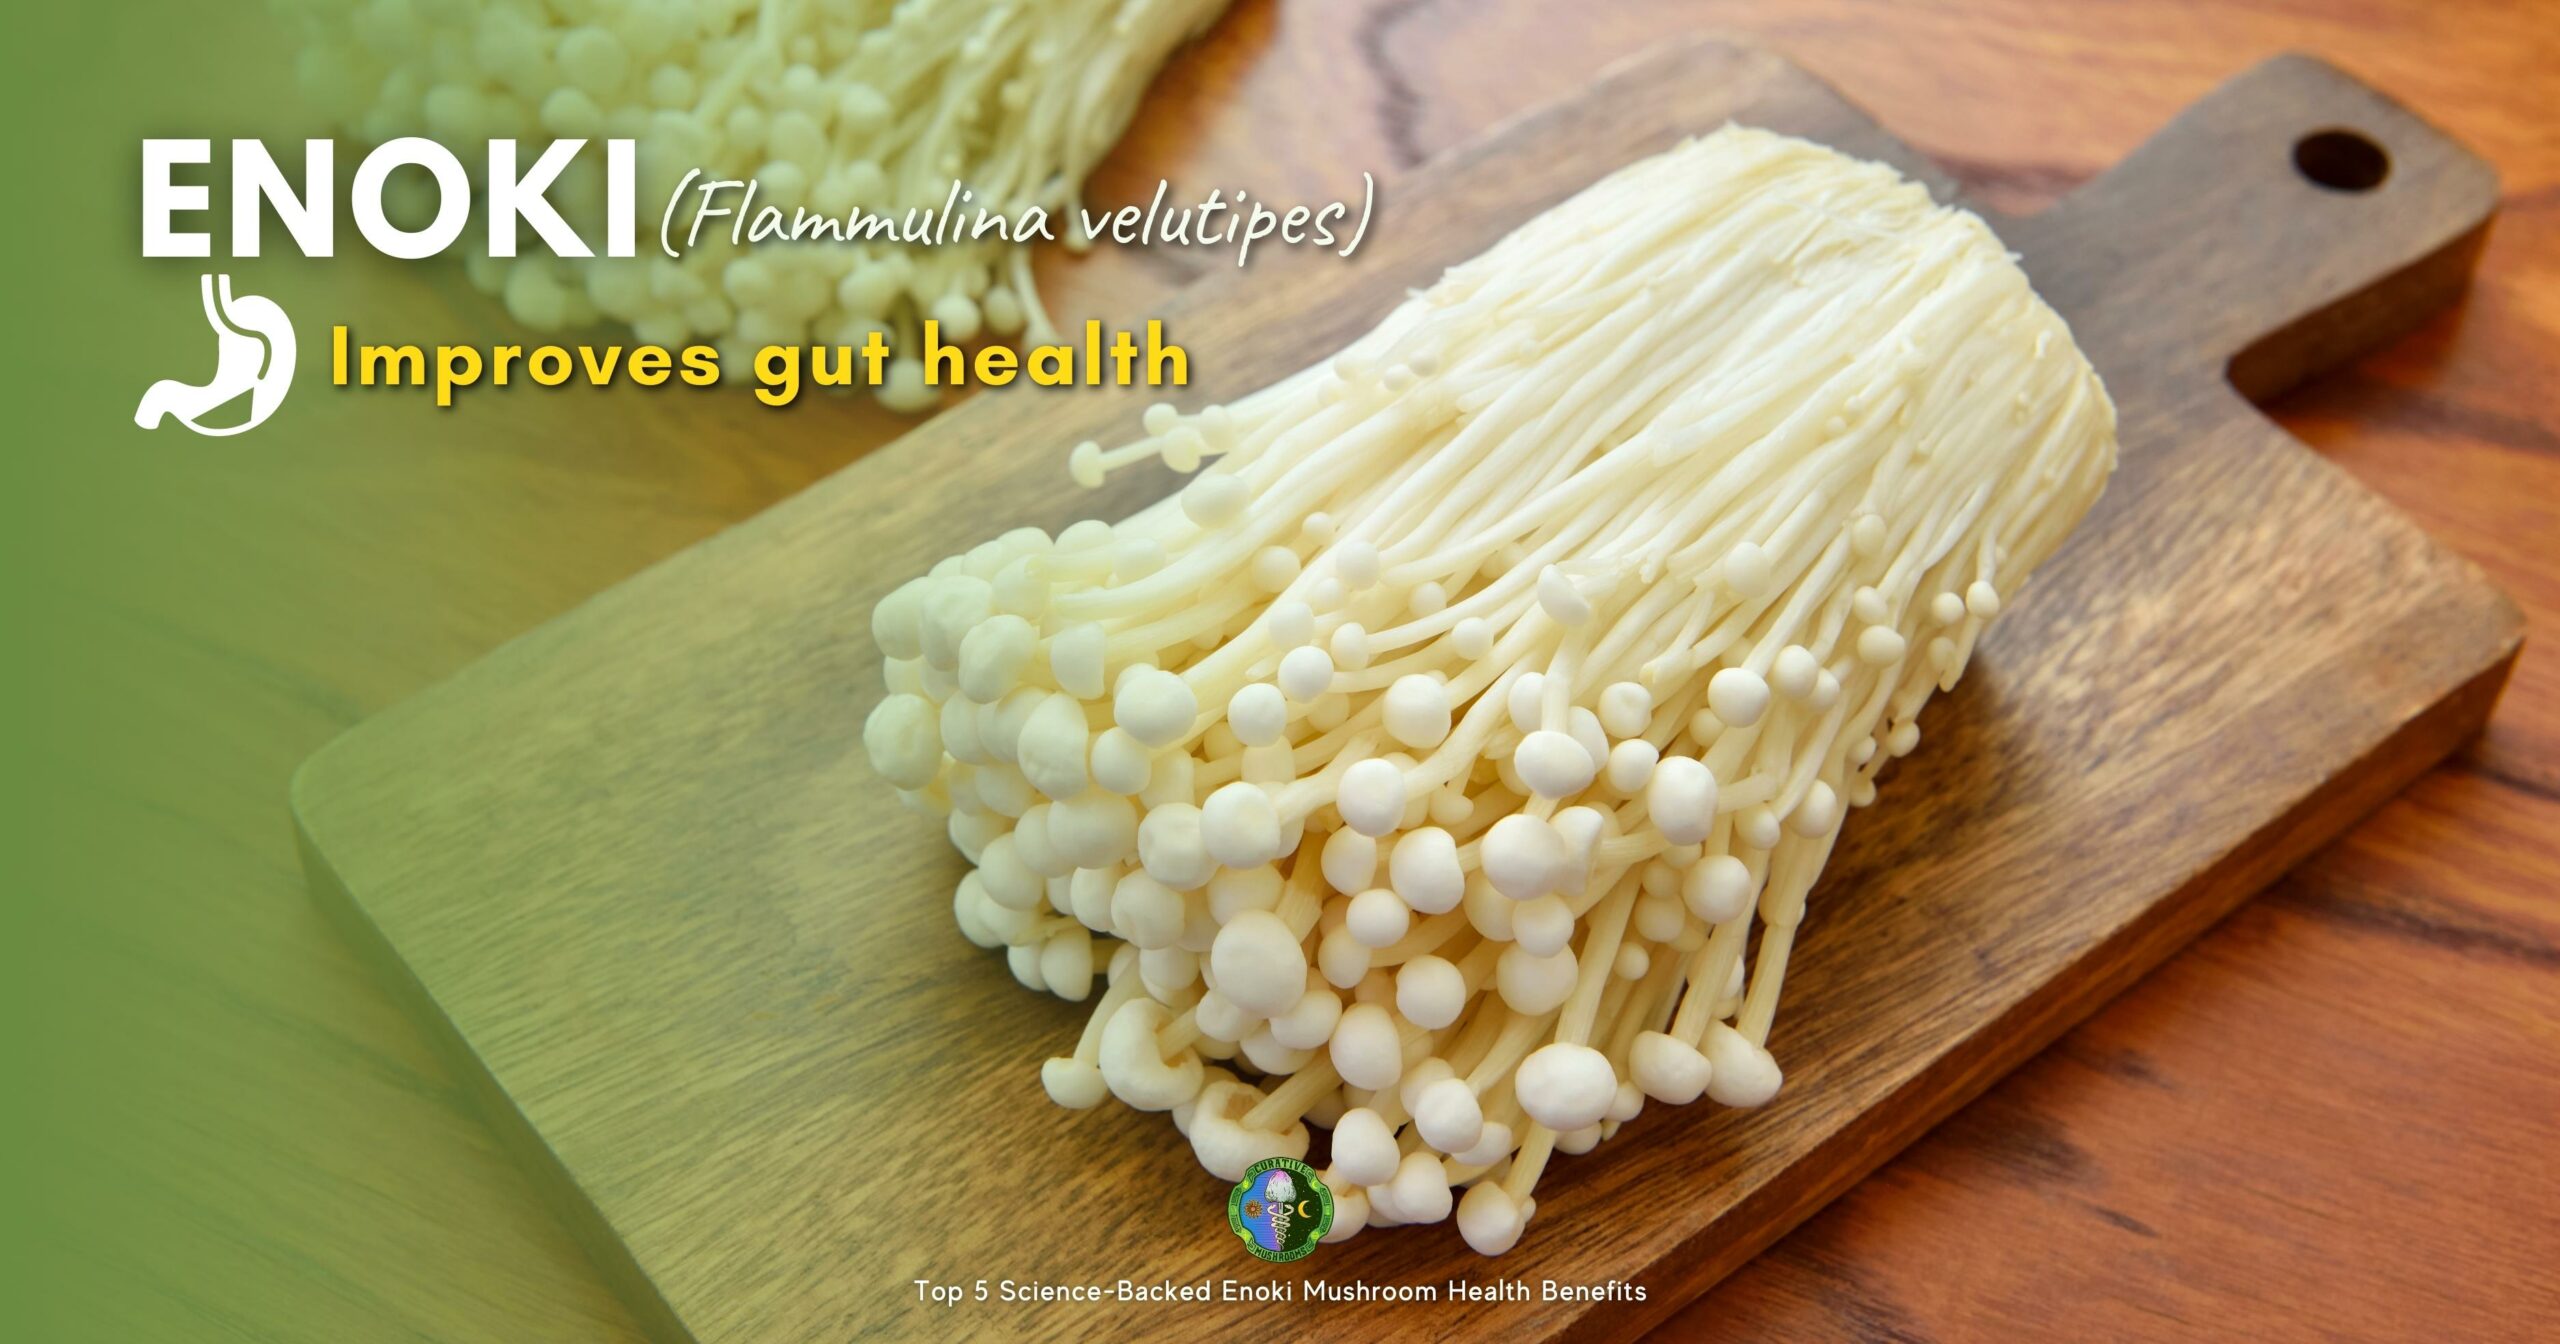 Enoki mushroom benefits health by Improving gut health - beta-glucans increase in the number of beneficial gut bacteria